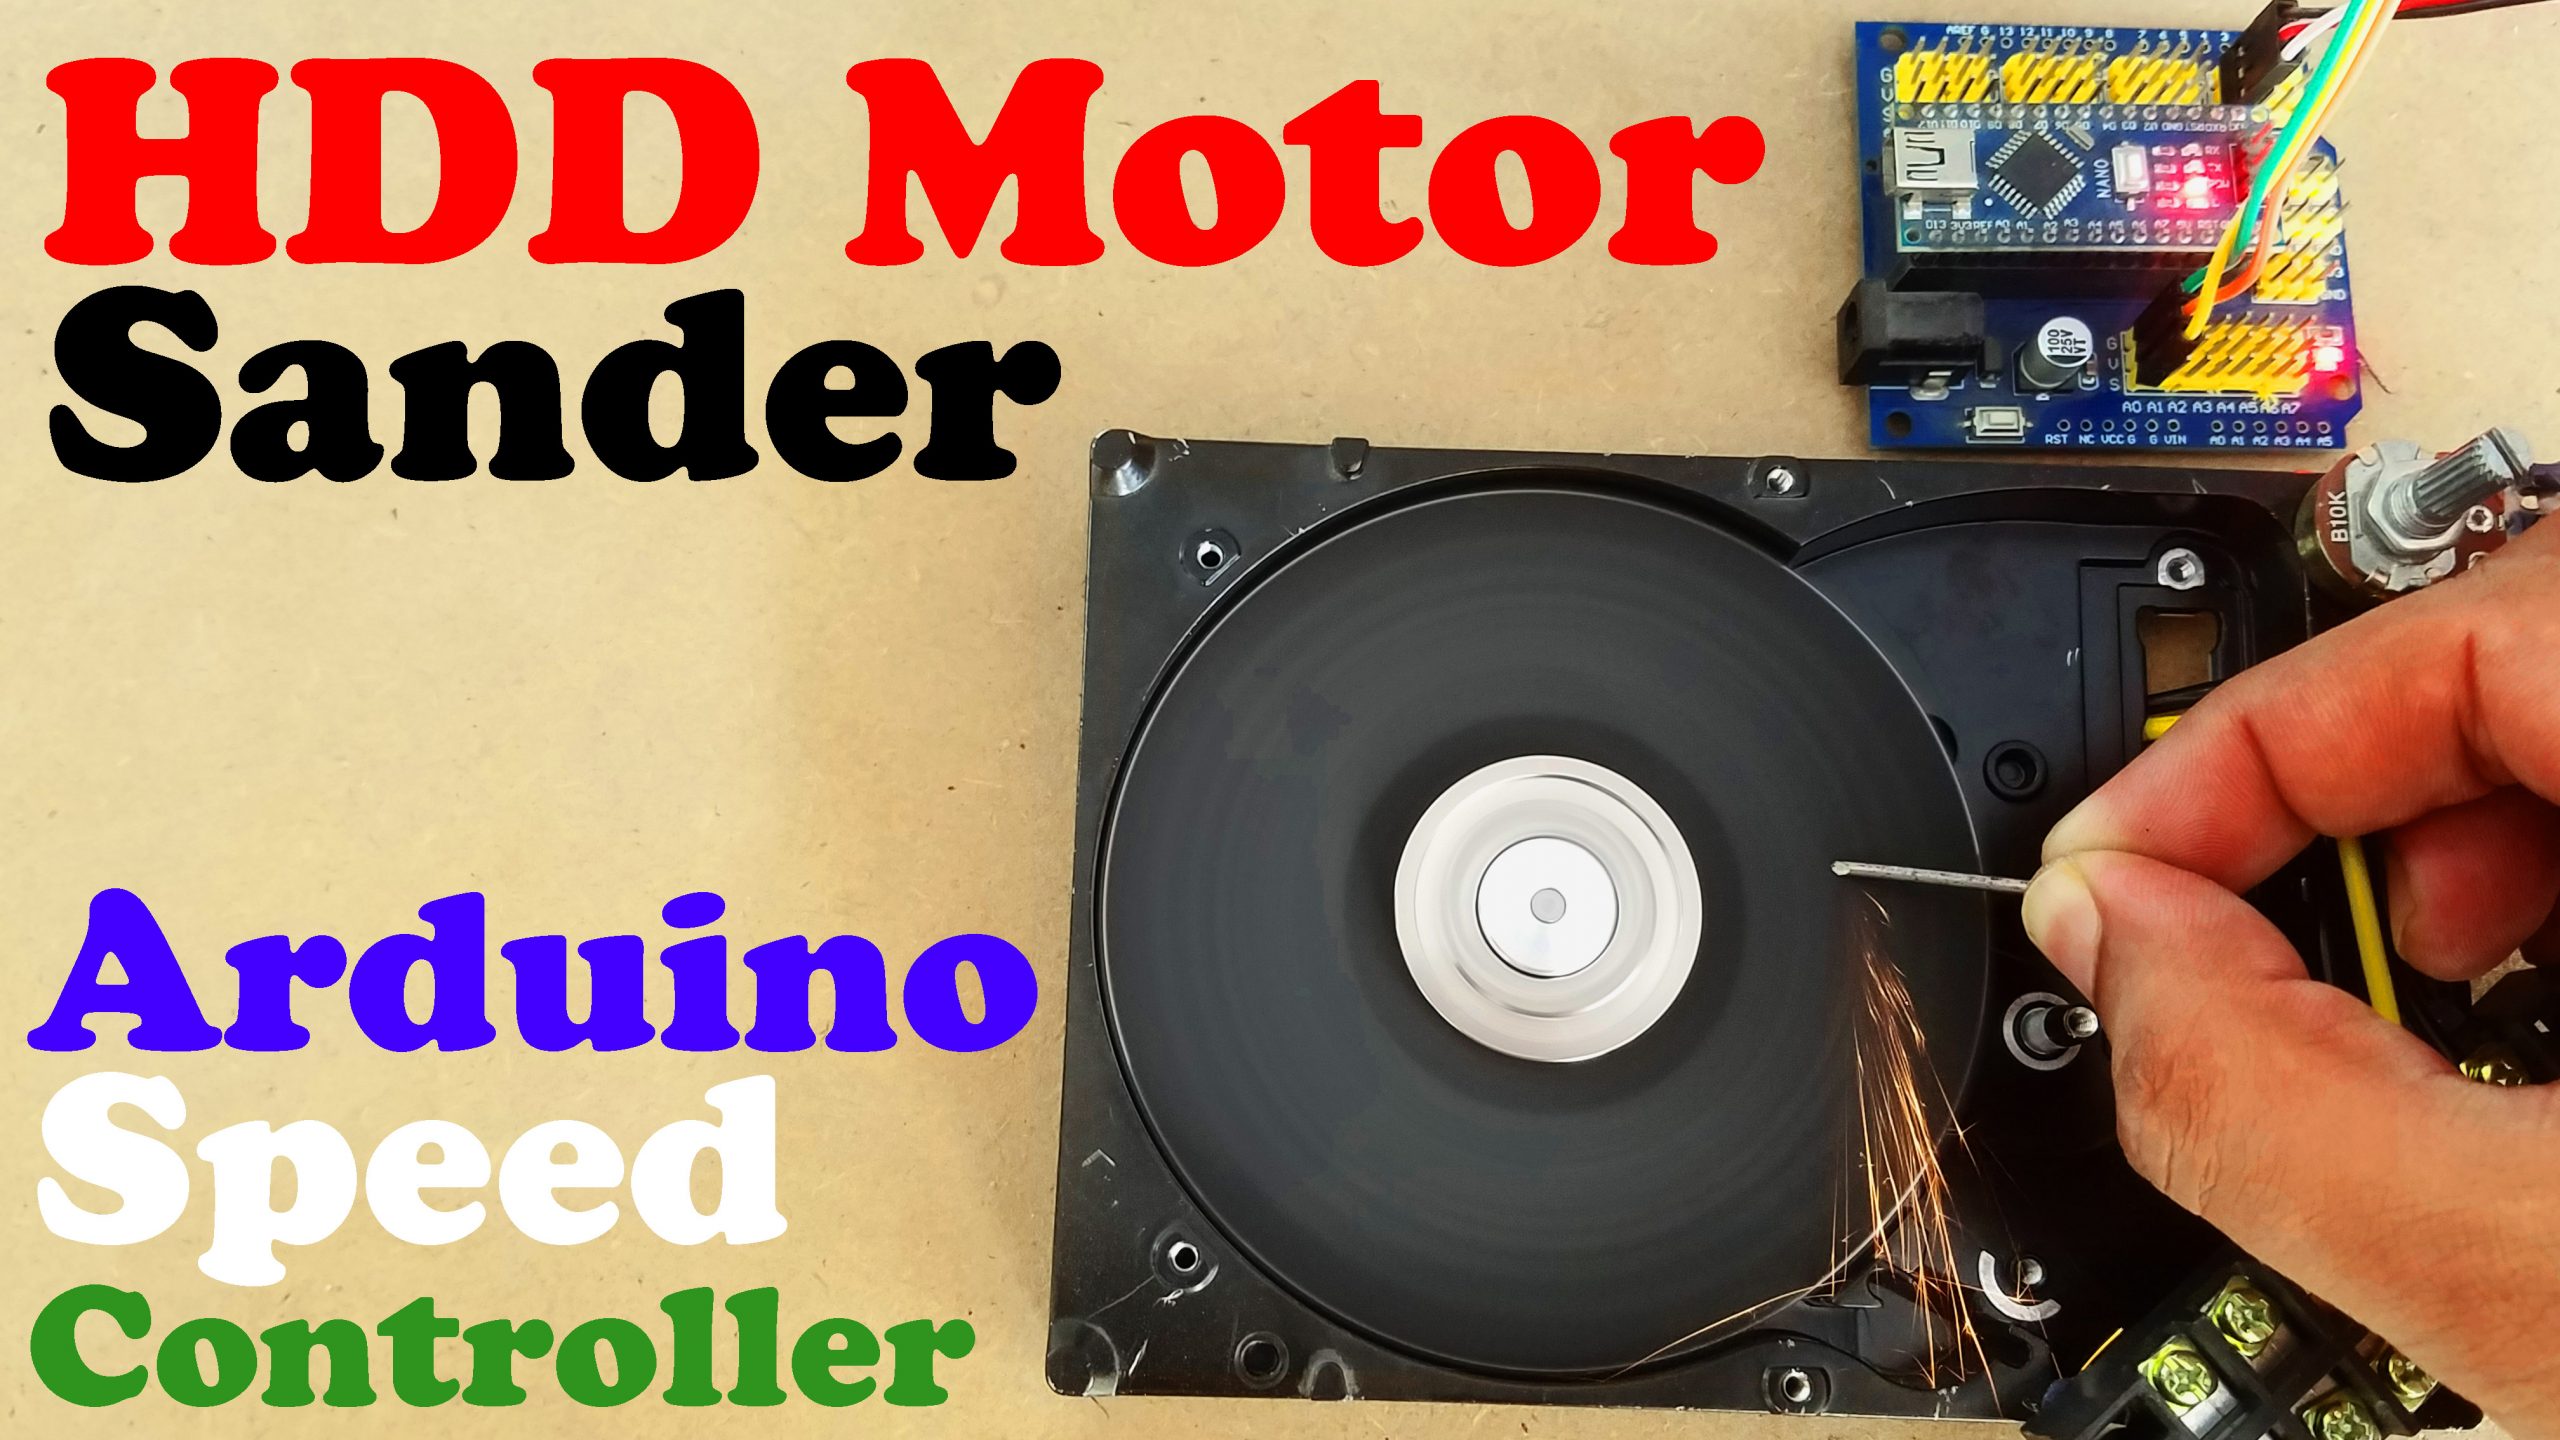 In this tutorial, you will learn how to turn your old Hard disk Motor